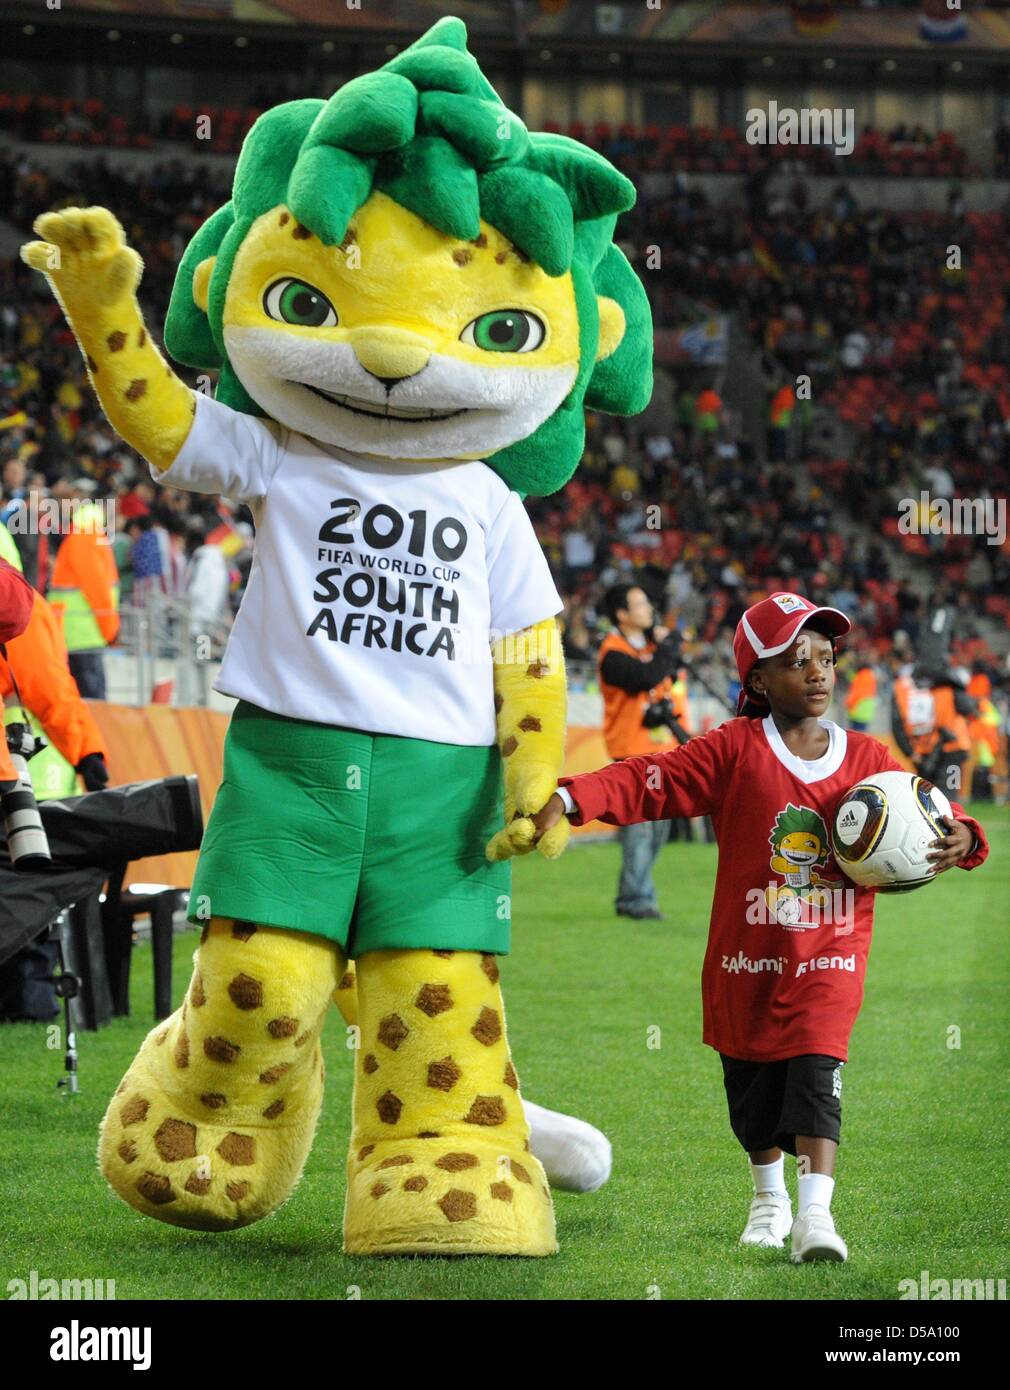 Zakumi, the official World Cup mascot walks hand in hand with a small girl on the pitch prior to the 2010 FIFA World Cup third place match at the Nelson Mandela Bay Stadium in Port Elizabeth, South Africa 10 July 2010. Photo: Marcus Brandt dpa - Please refer to http://dpaq.de/FIFA-WM2010-TC  +++(c) dpa - Bildfunk+++ Stock Photo